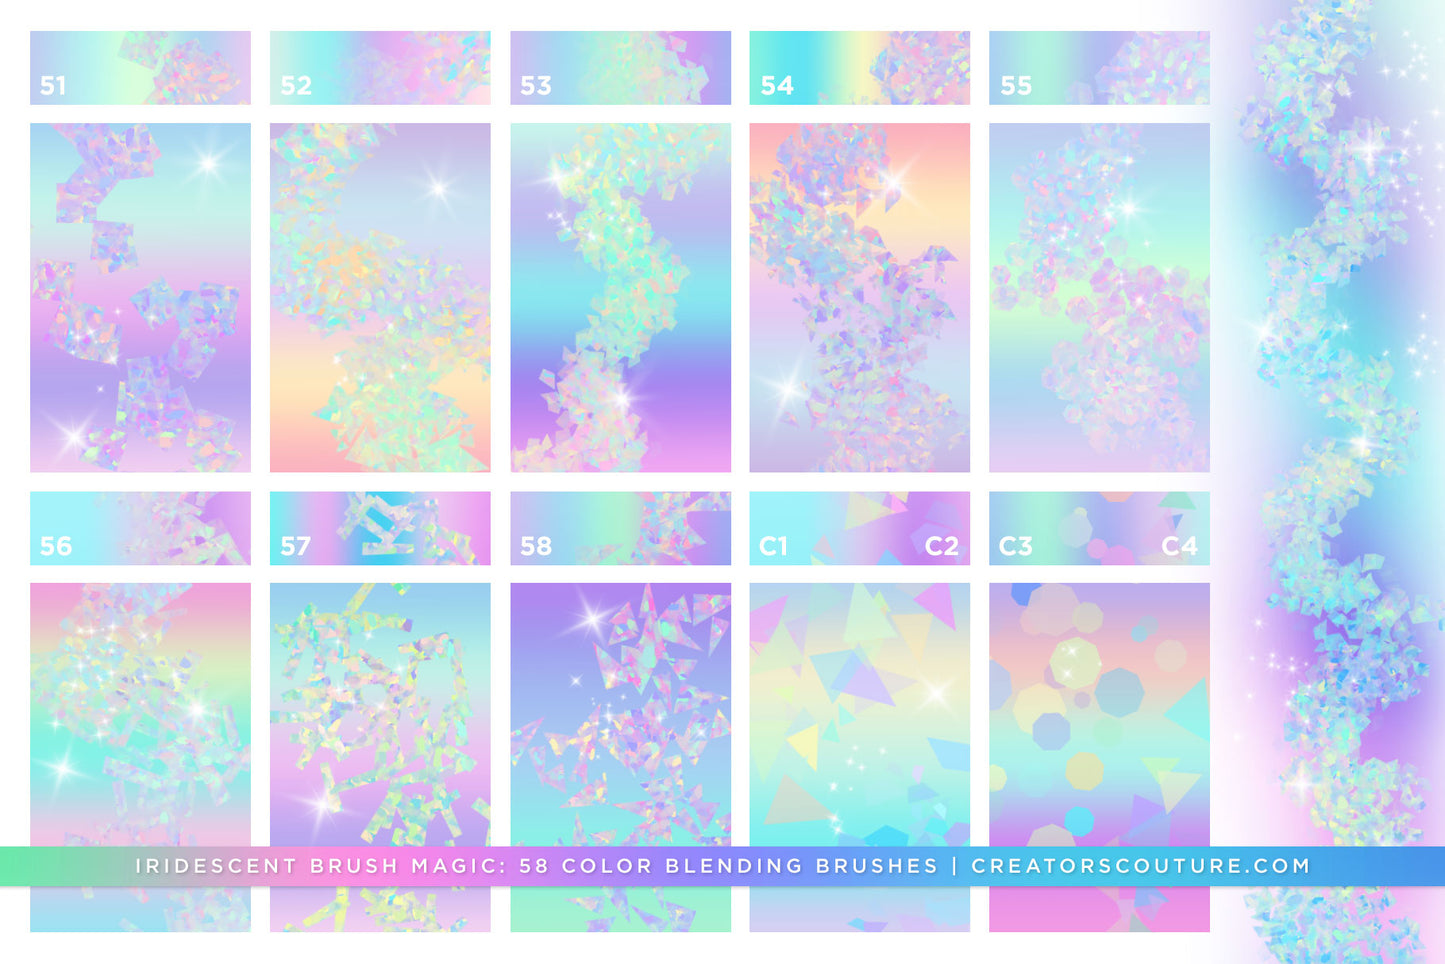 photoshop brushes for instant iridescent and holographic effects and brush strokes, brush preview chart 6